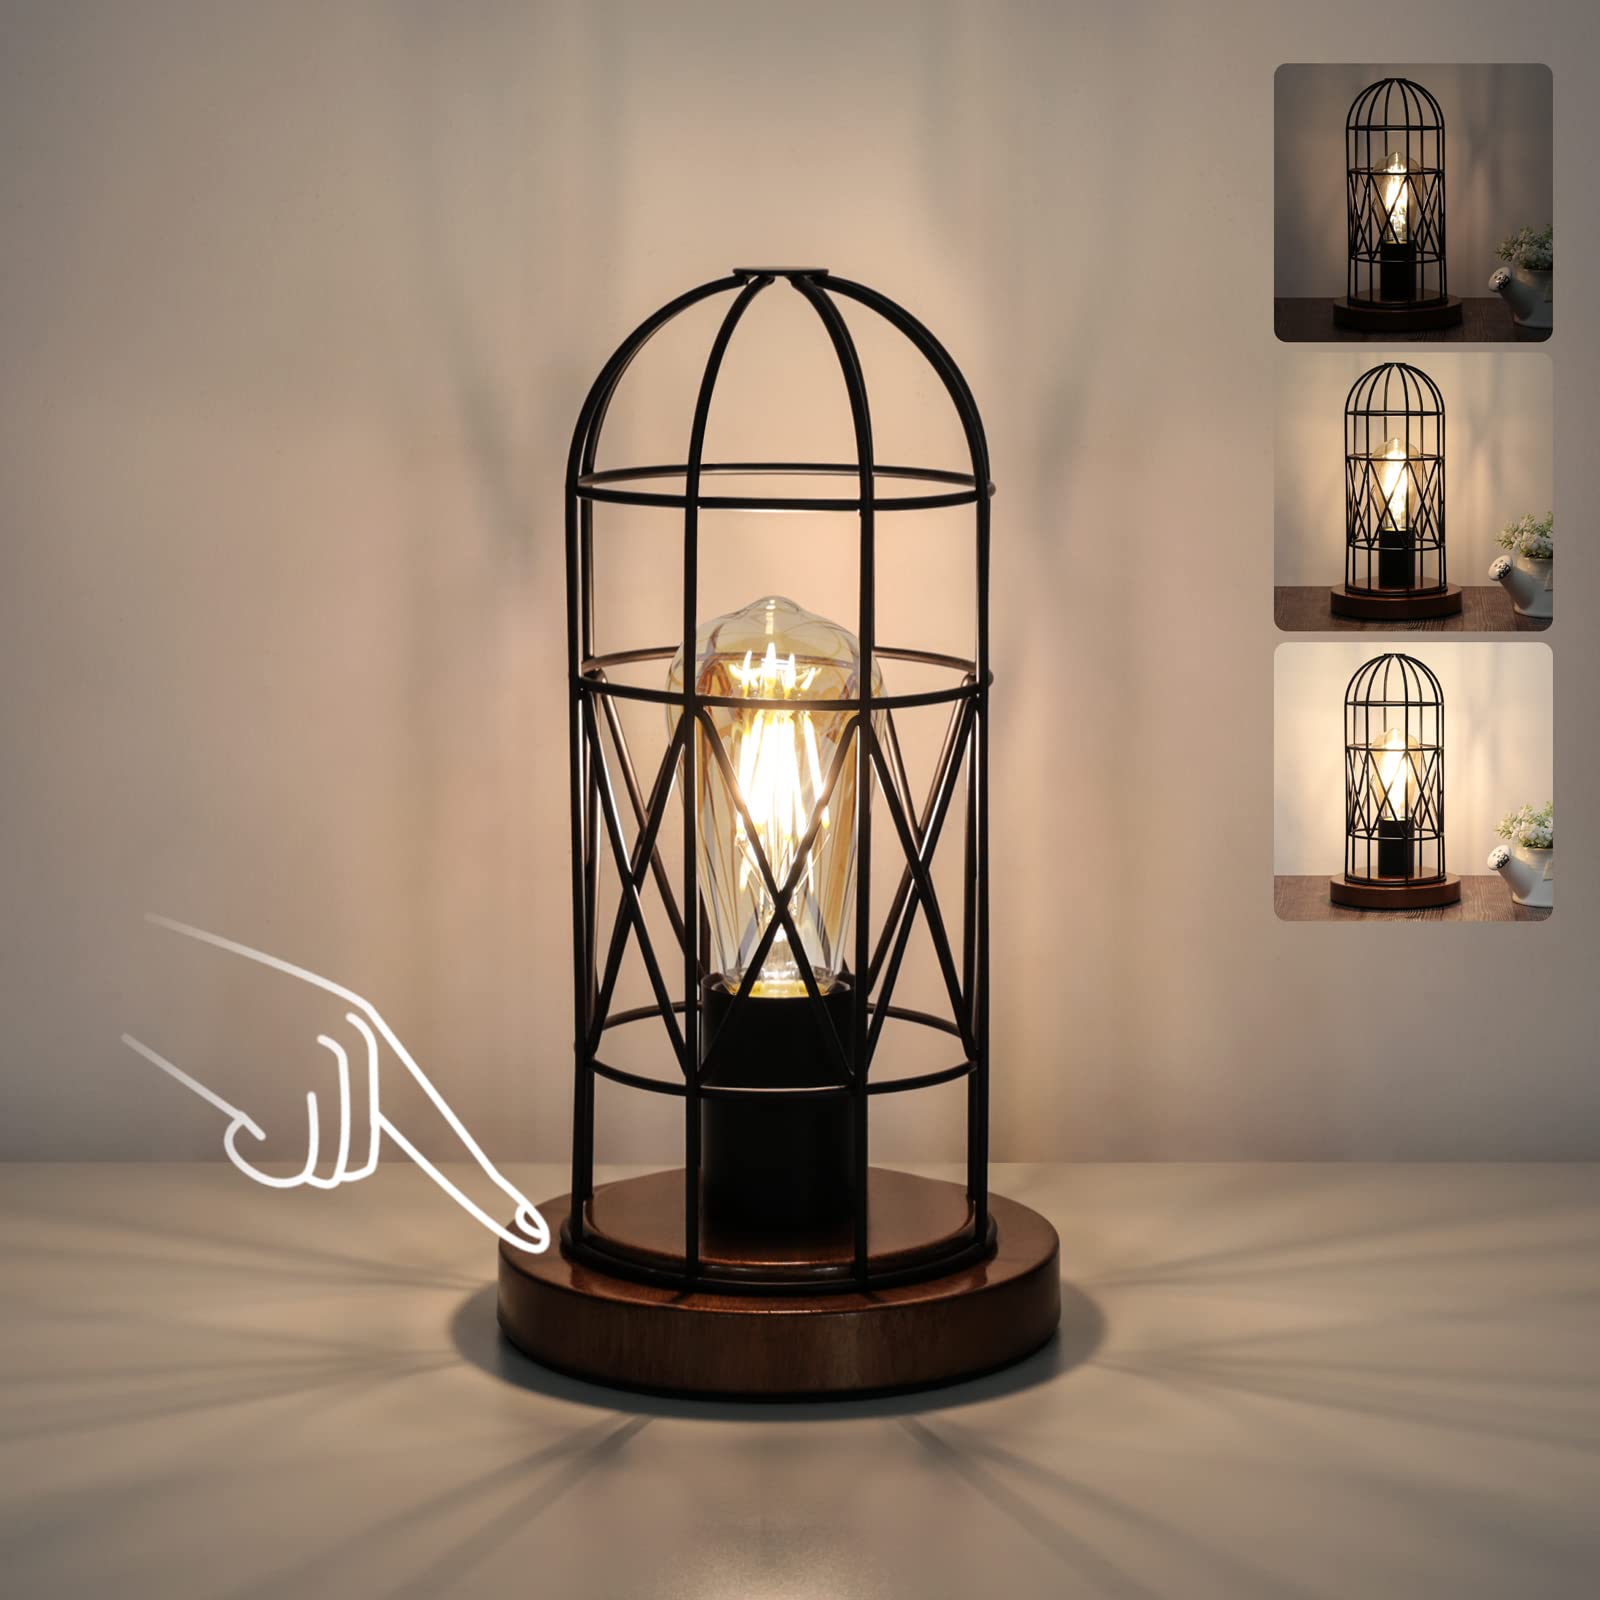 Touch Control Table Lamp, Industrial Bedside Lamp with 3 Way Dimmable Small Nightstand Lamp Vintage Metal Cage Table Lamp for Bedroom, Kitchen